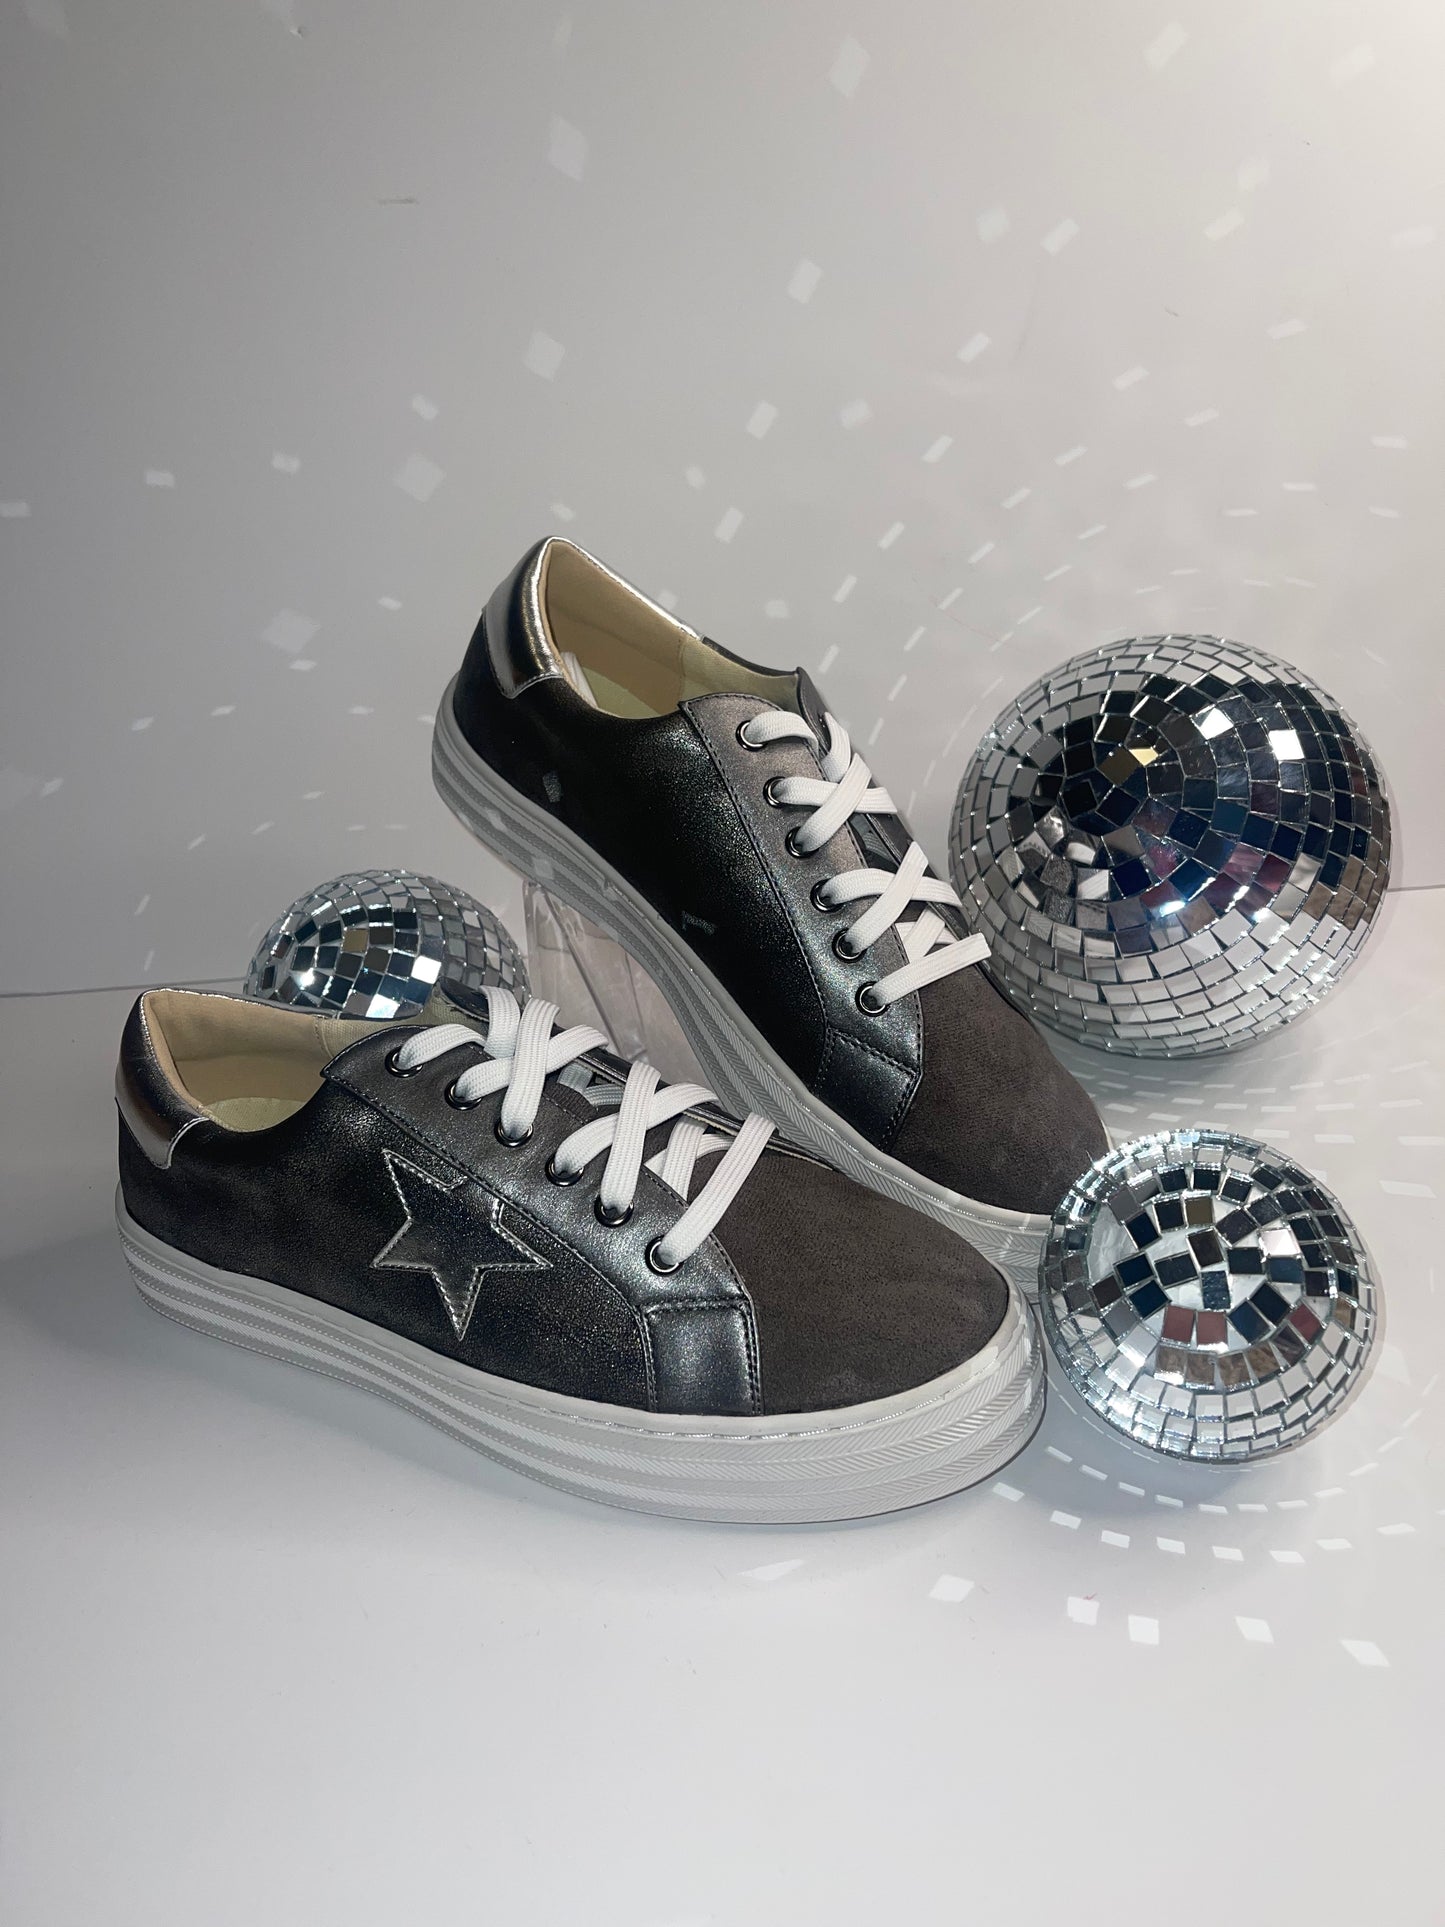 stary eyed silver sneaker